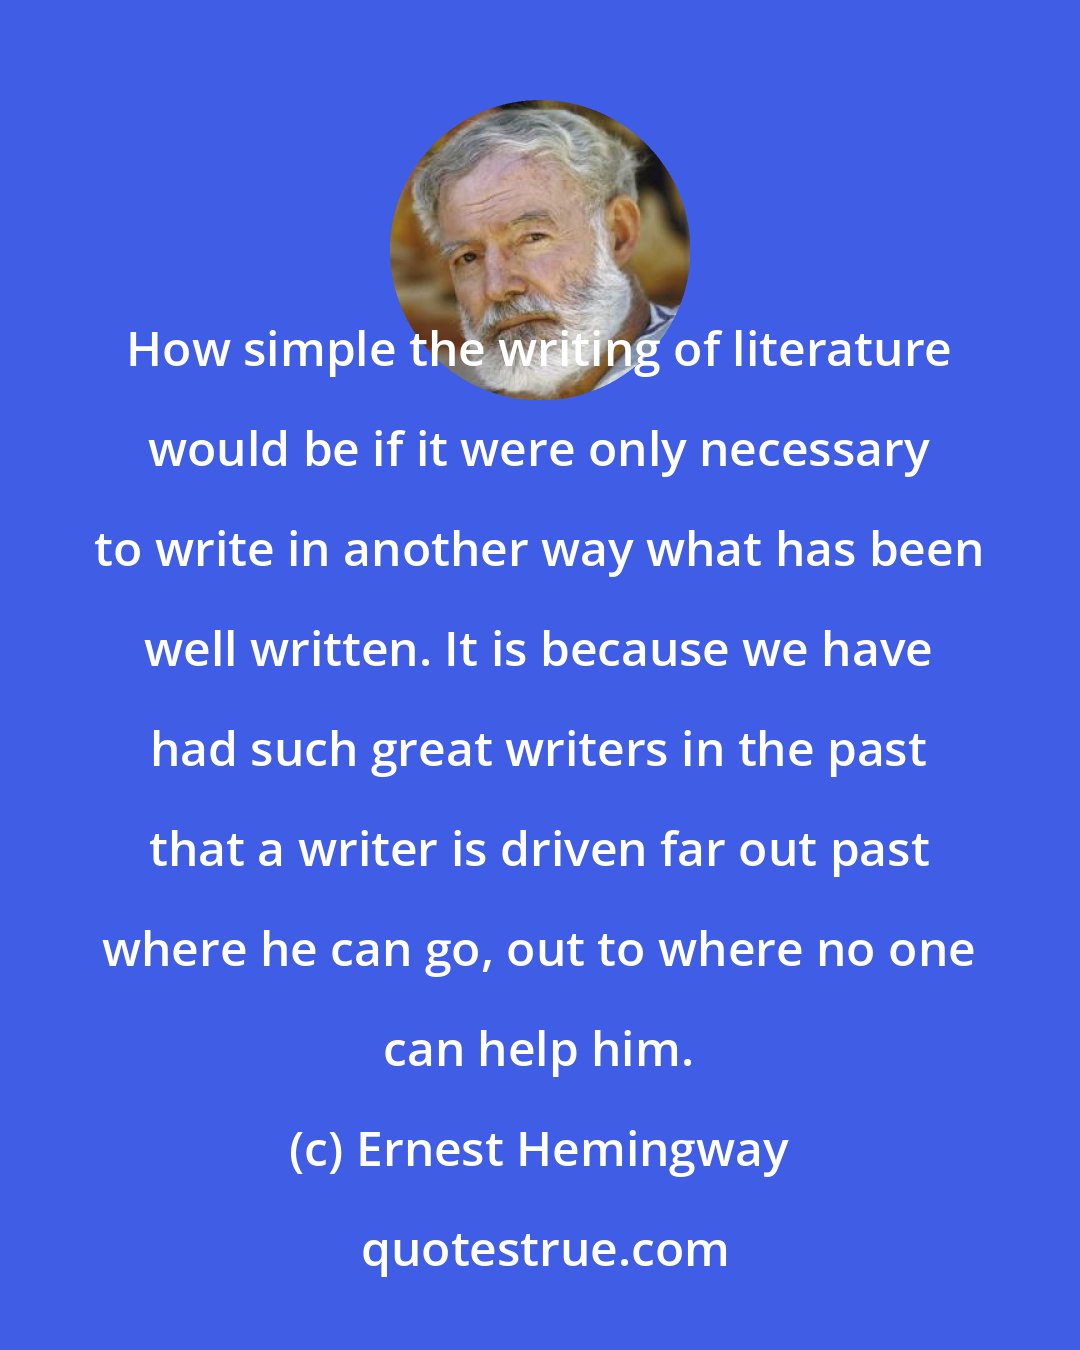 Ernest Hemingway: How simple the writing of literature would be if it were only necessary to write in another way what has been well written. It is because we have had such great writers in the past that a writer is driven far out past where he can go, out to where no one can help him.